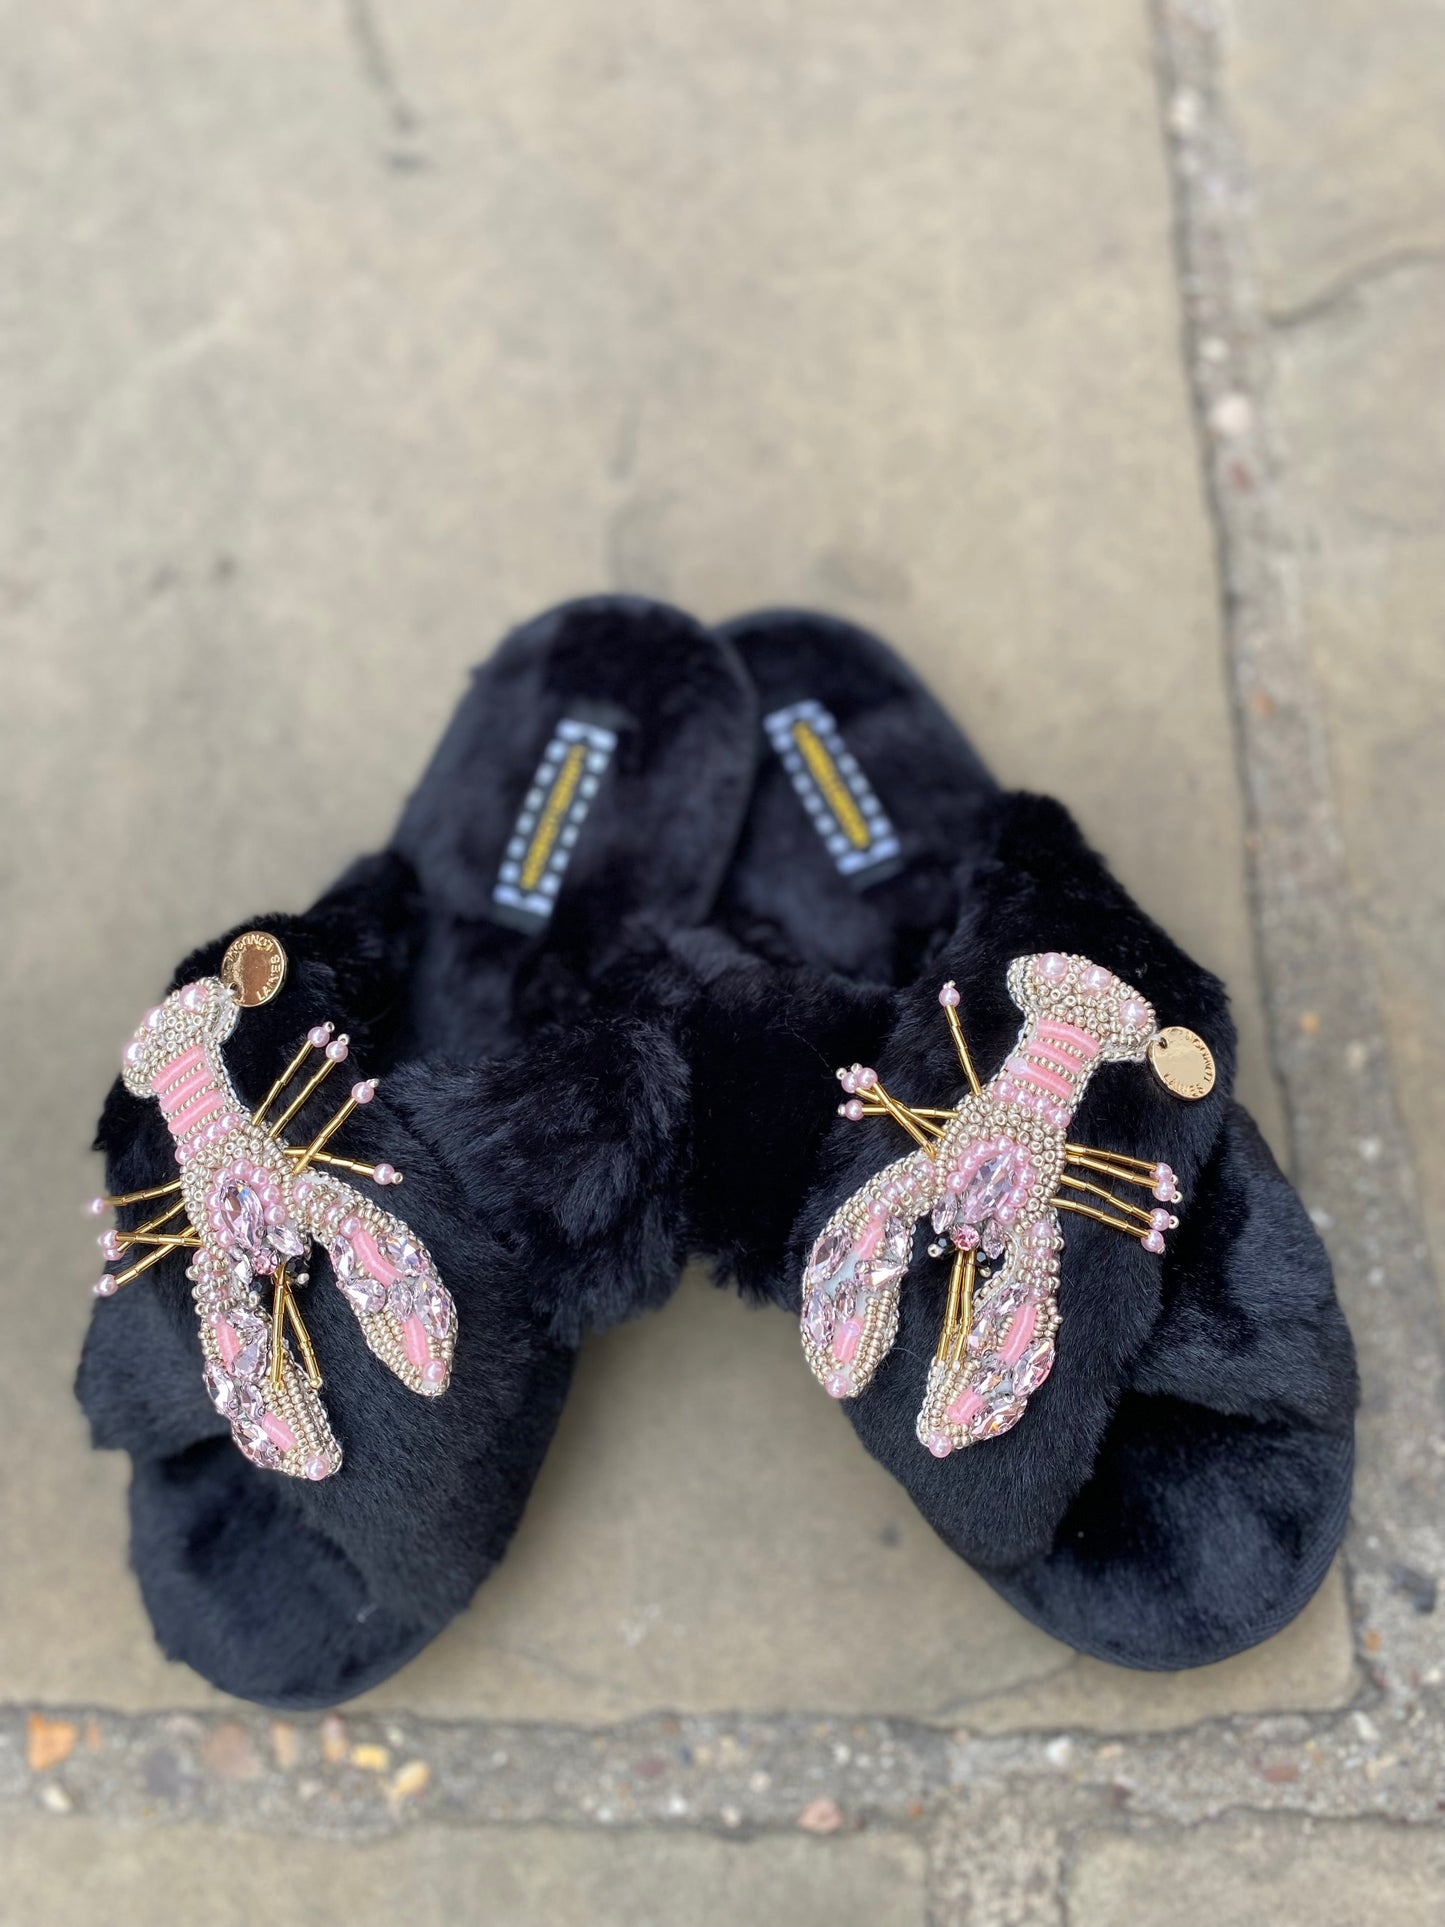 🖤Double Pink Lobsters on Classic Black Slippers🖤